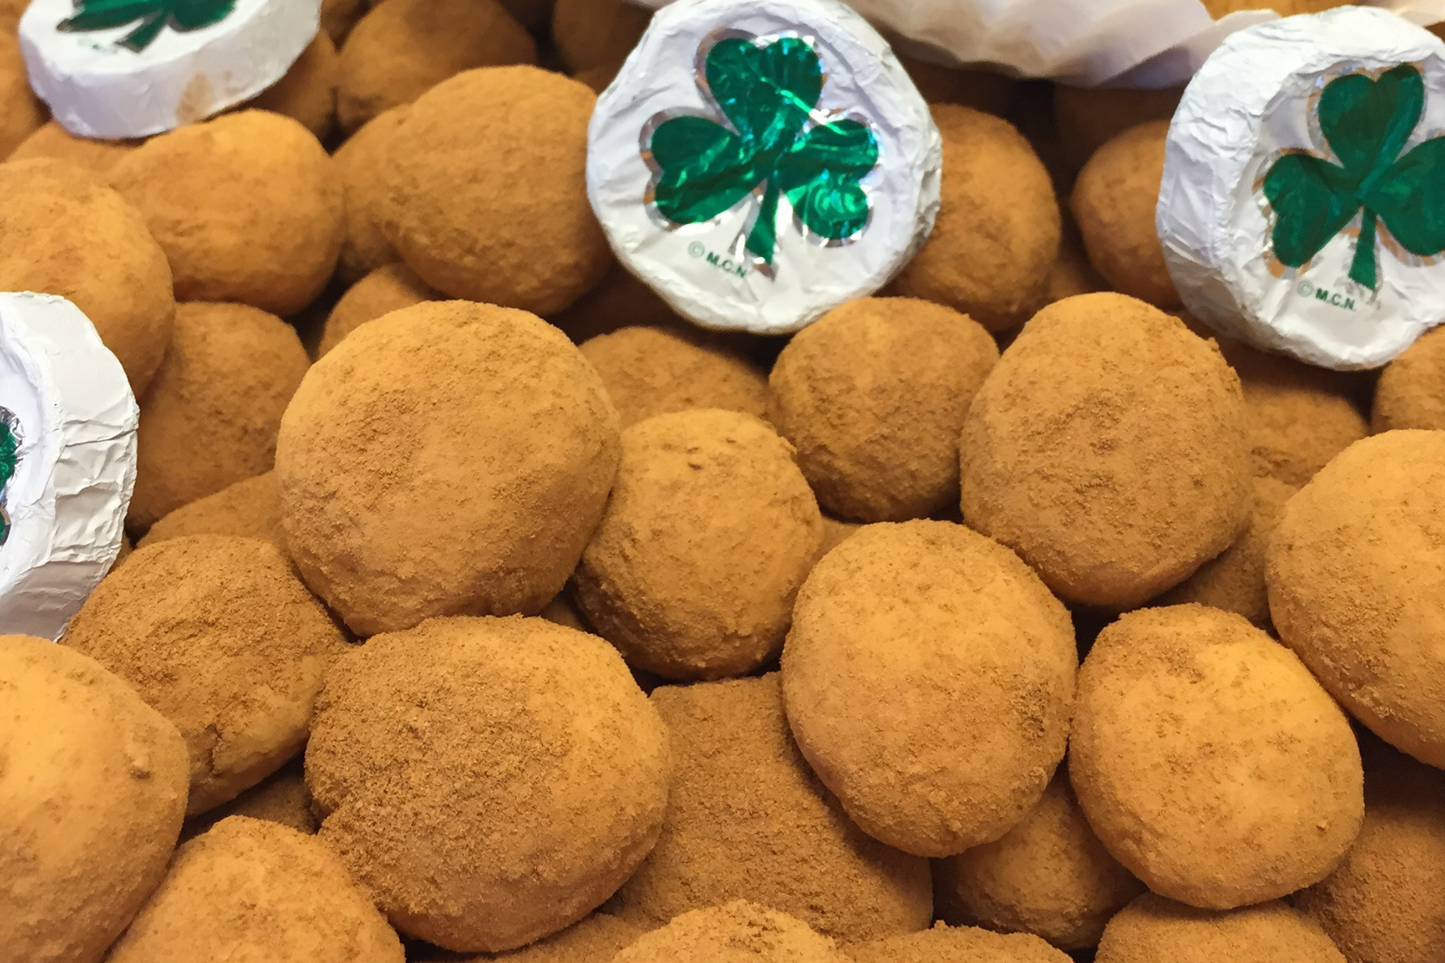 Irish Potatoes: A heavenly blend of coconut cream, delicately rolled in aromatic cinnamon for a delightful taste of tradition from Mueller Chocolate Co.